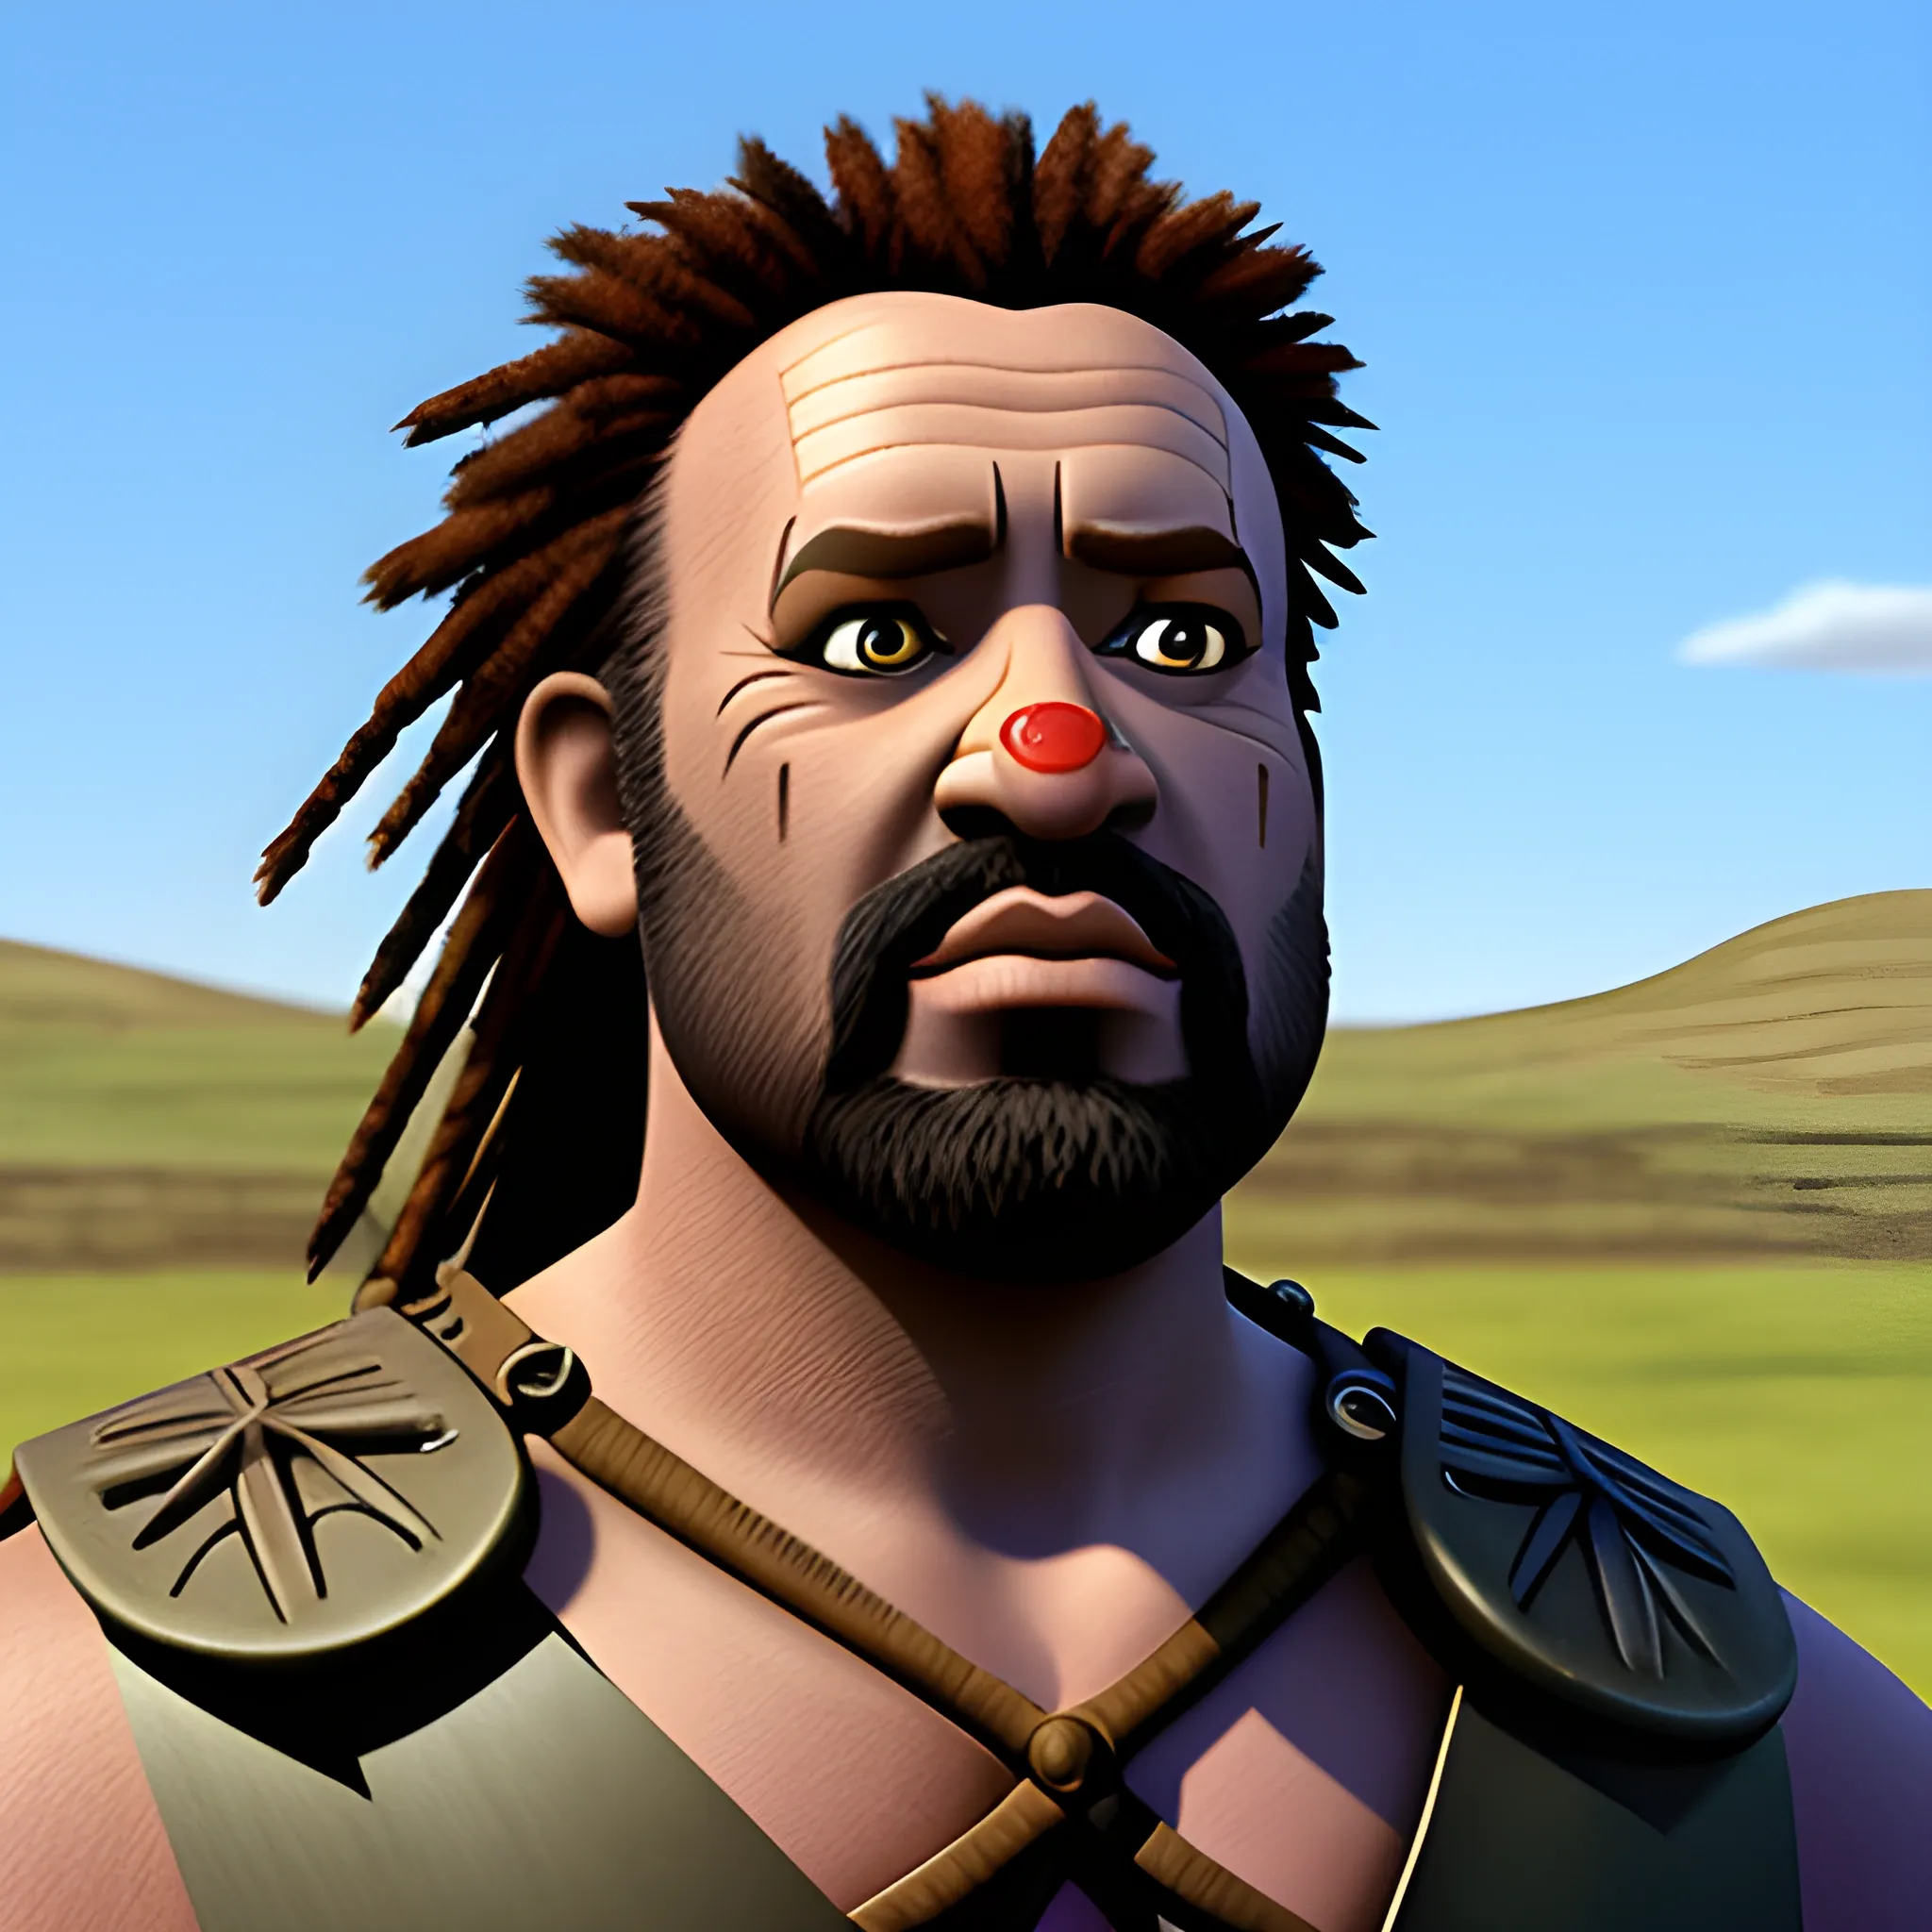 William wallace from Braveheart movie as an African American, Cartoon, 3D